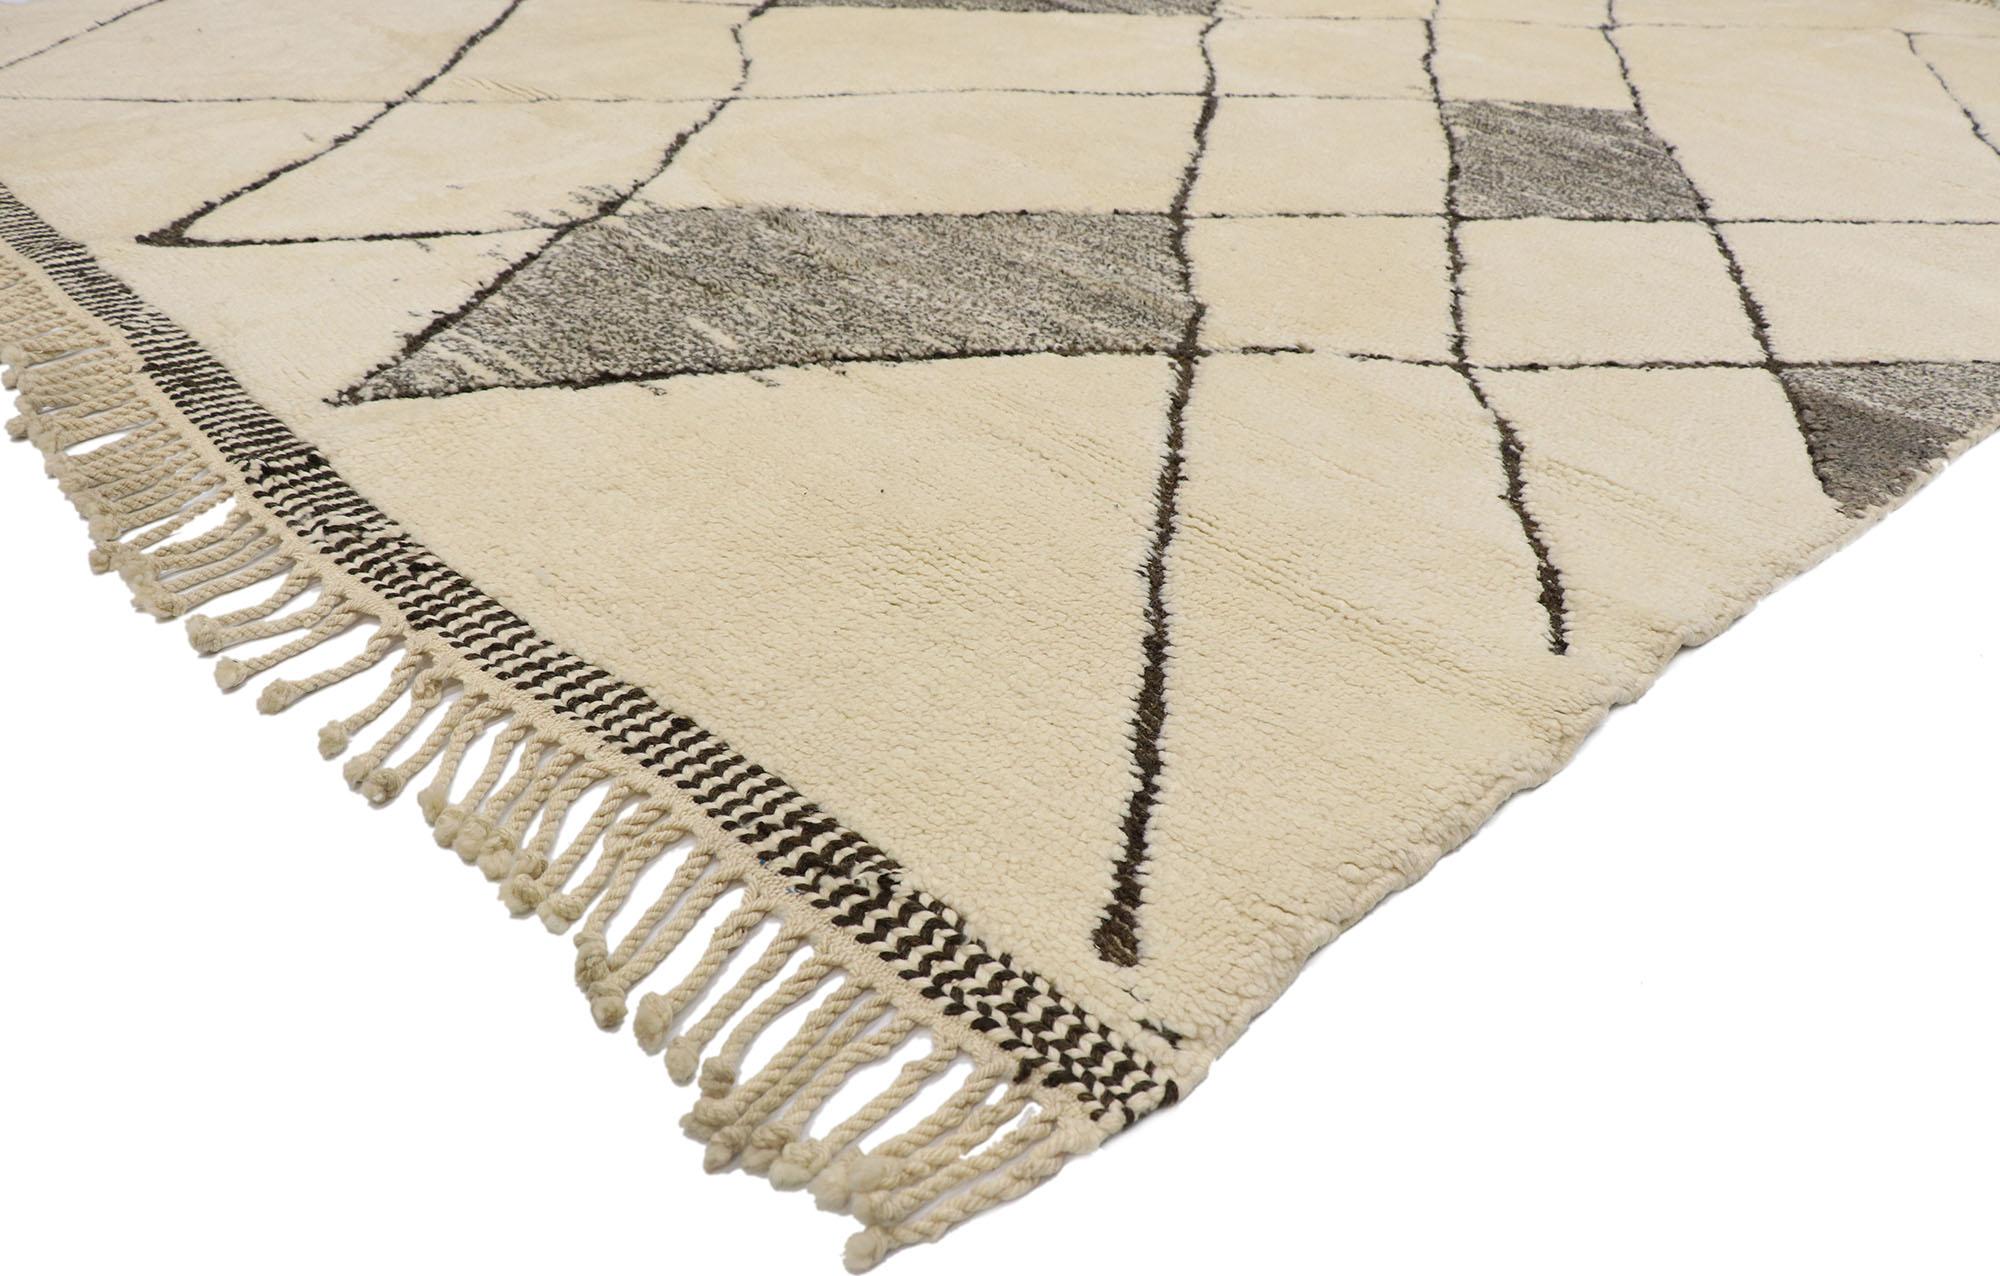 21157 New Berber Moroccan Rug with Organic Modern Style 09'00 x 11'00. With its simplicity, plush pile and Modern style, this hand knotted wool Berber Moroccan rug provides a feeling of cozy contentment without the clutter. The abrashed beige field